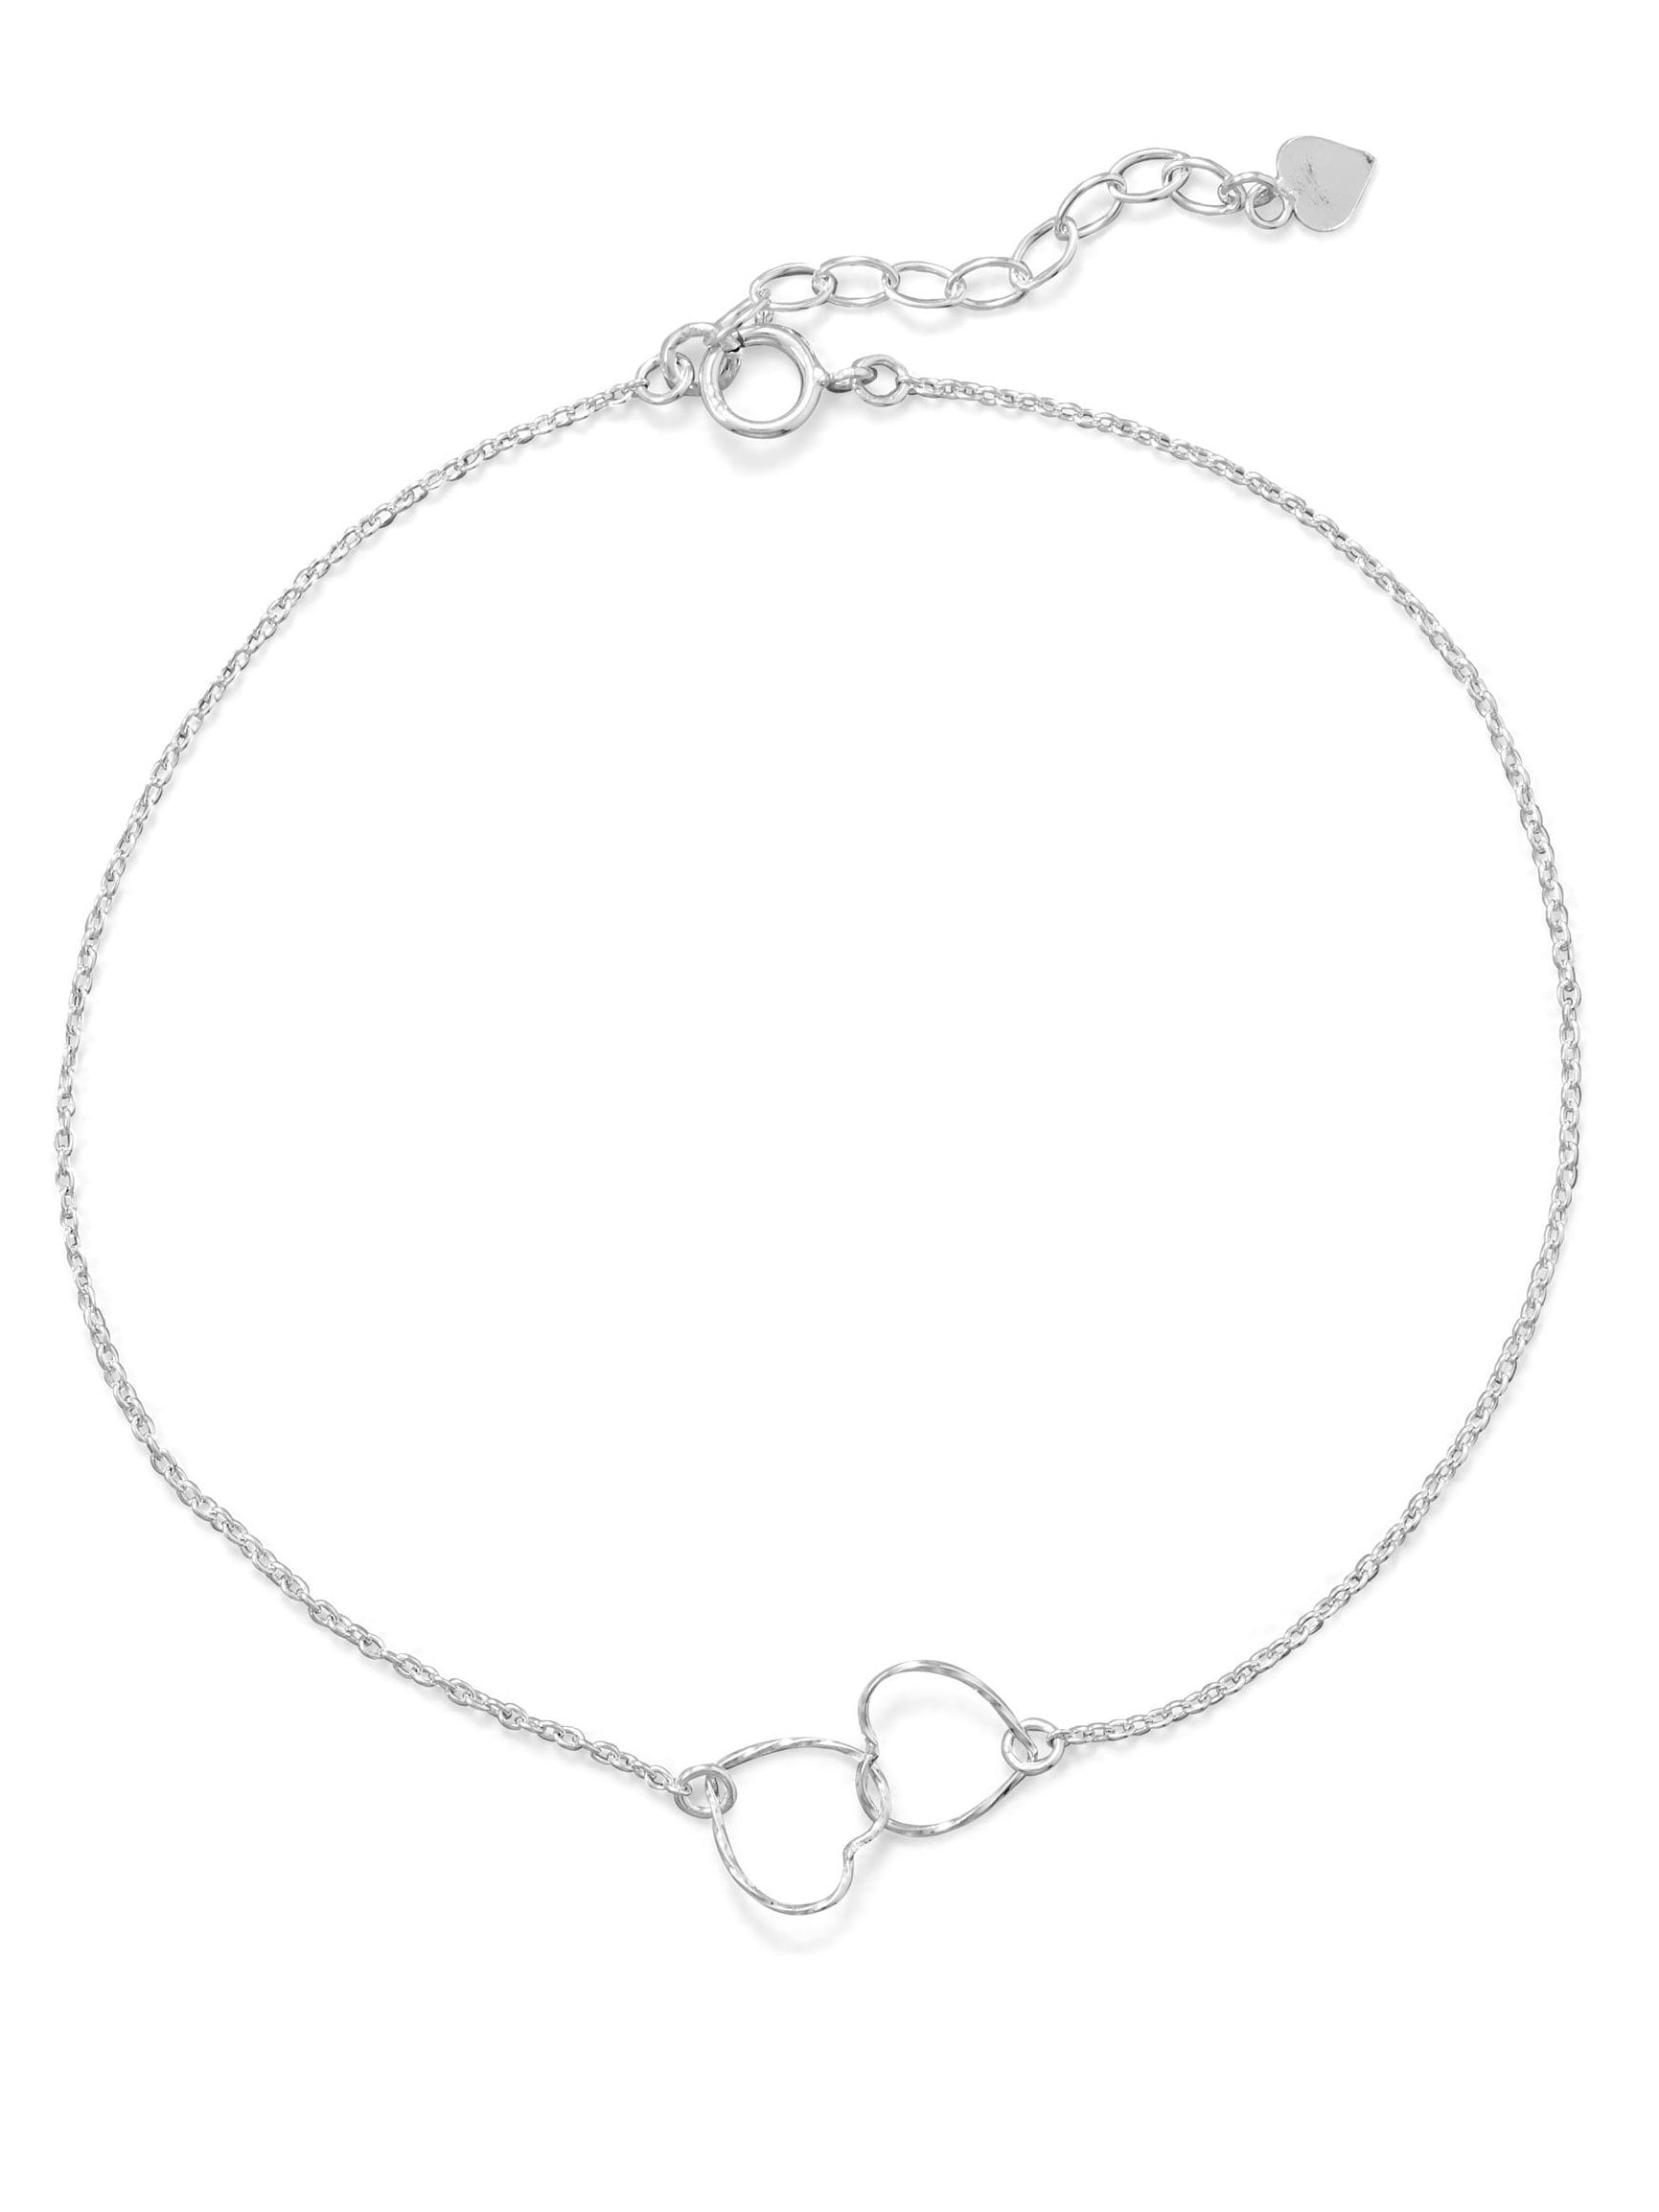 Sterling Silver Anklet with Heart & Flower Links fits 9-10 inch Ankles